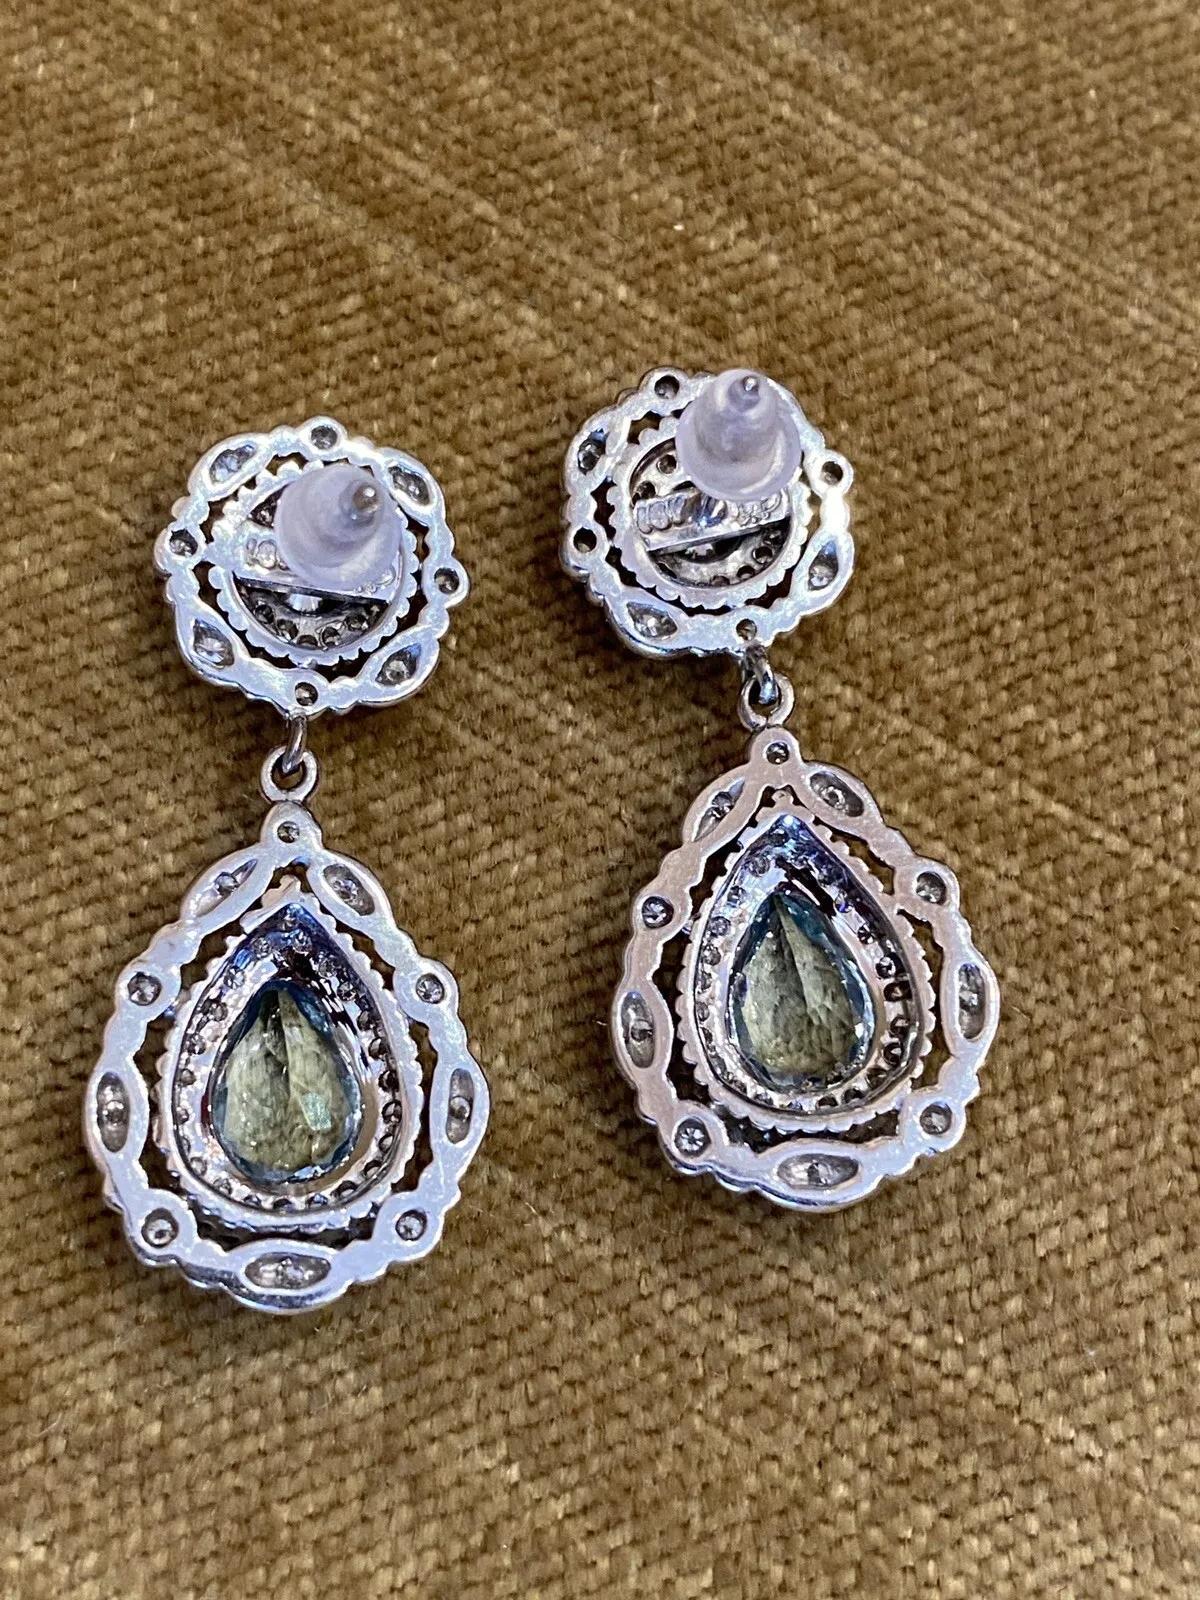 Doris Panos Aquamarine and Diamond Drop Earrings in 18k White Gold In Excellent Condition For Sale In La Jolla, CA